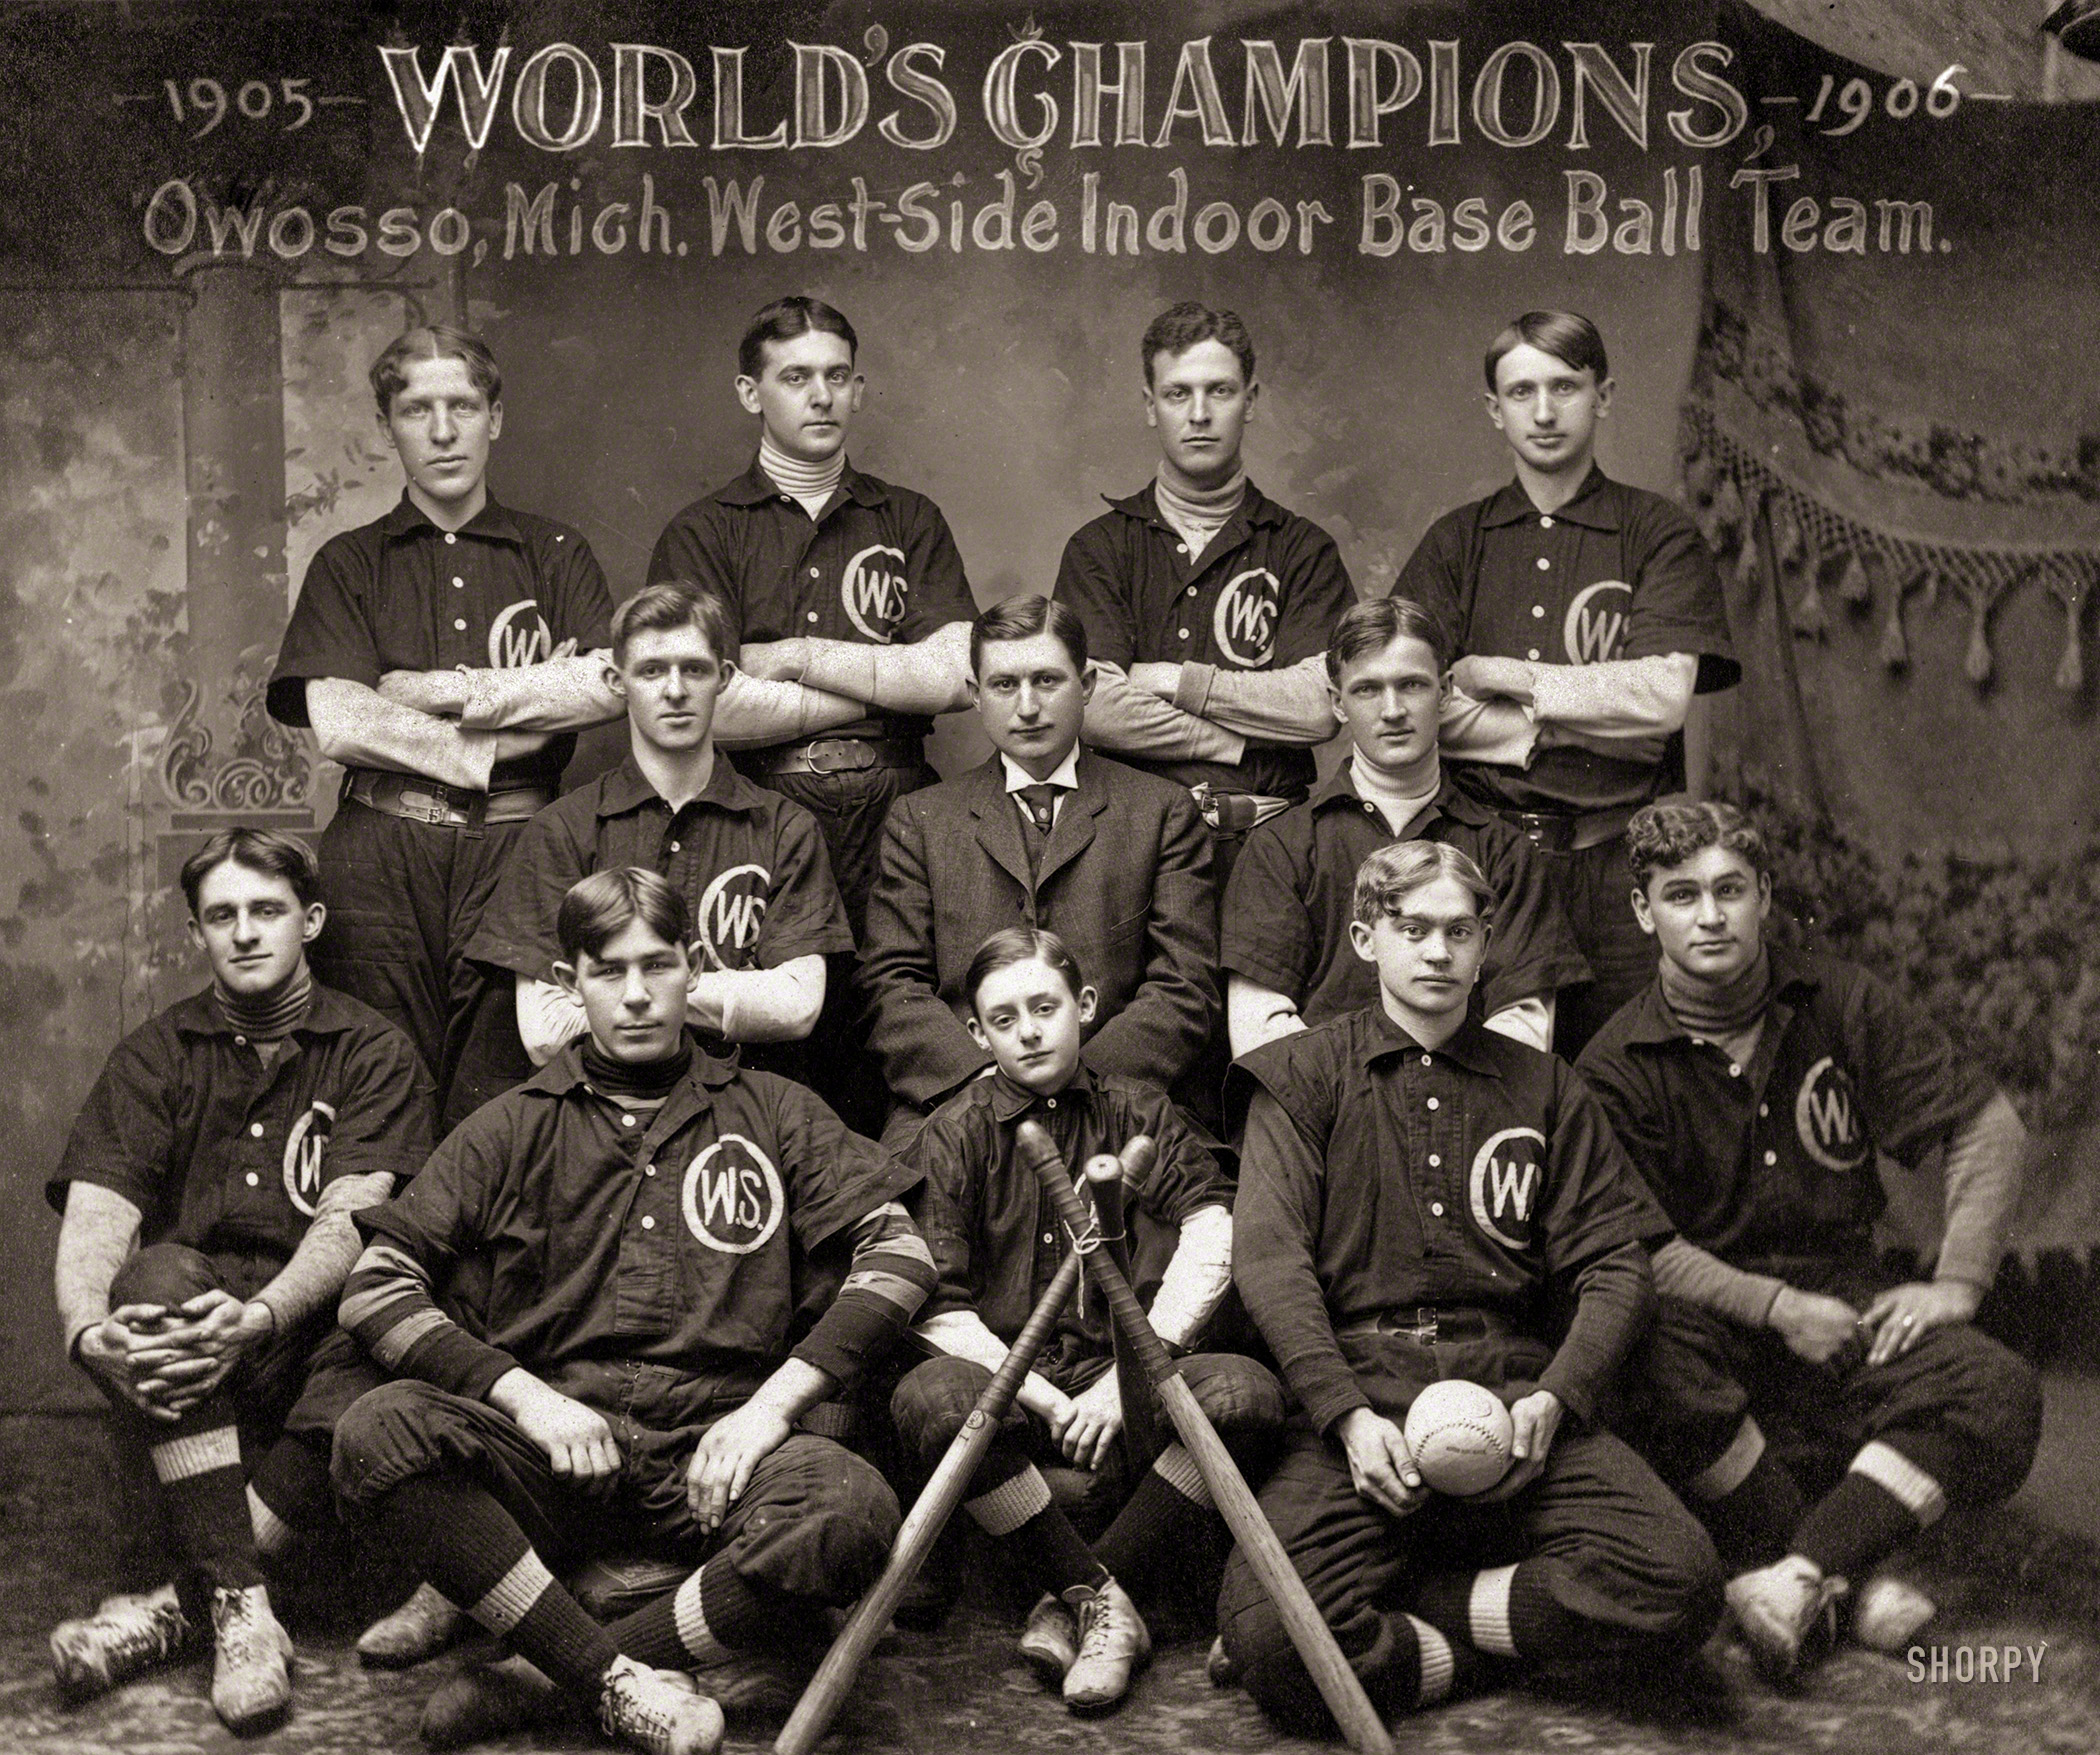 &nbsp; &nbsp; &nbsp; &nbsp; "Indoor baseball, both from a spectacular point of view and from the benefit and pleasure it gives participants, is in every way worthy to take a high place among the Winter sports."
-- New York Times, Nov. 26, 1900
"World's Champions, 1905-1906, Owosso, Mich., West-Side Indoor Base Ball Team." Indoor Baseball, said to have been invented in Chicago in 1887, eventually moved outside, where it was renamed softball. The 1919 Encyclopedia Americana entry for Indoor Baseball specifies a hall at least 40 by 50 feet in size for play. Two outfielders could be "dispensed", leaving seven men on a team. The ball could be as big as 17¼ inches around. (Baseball-Reference.com) View full size.